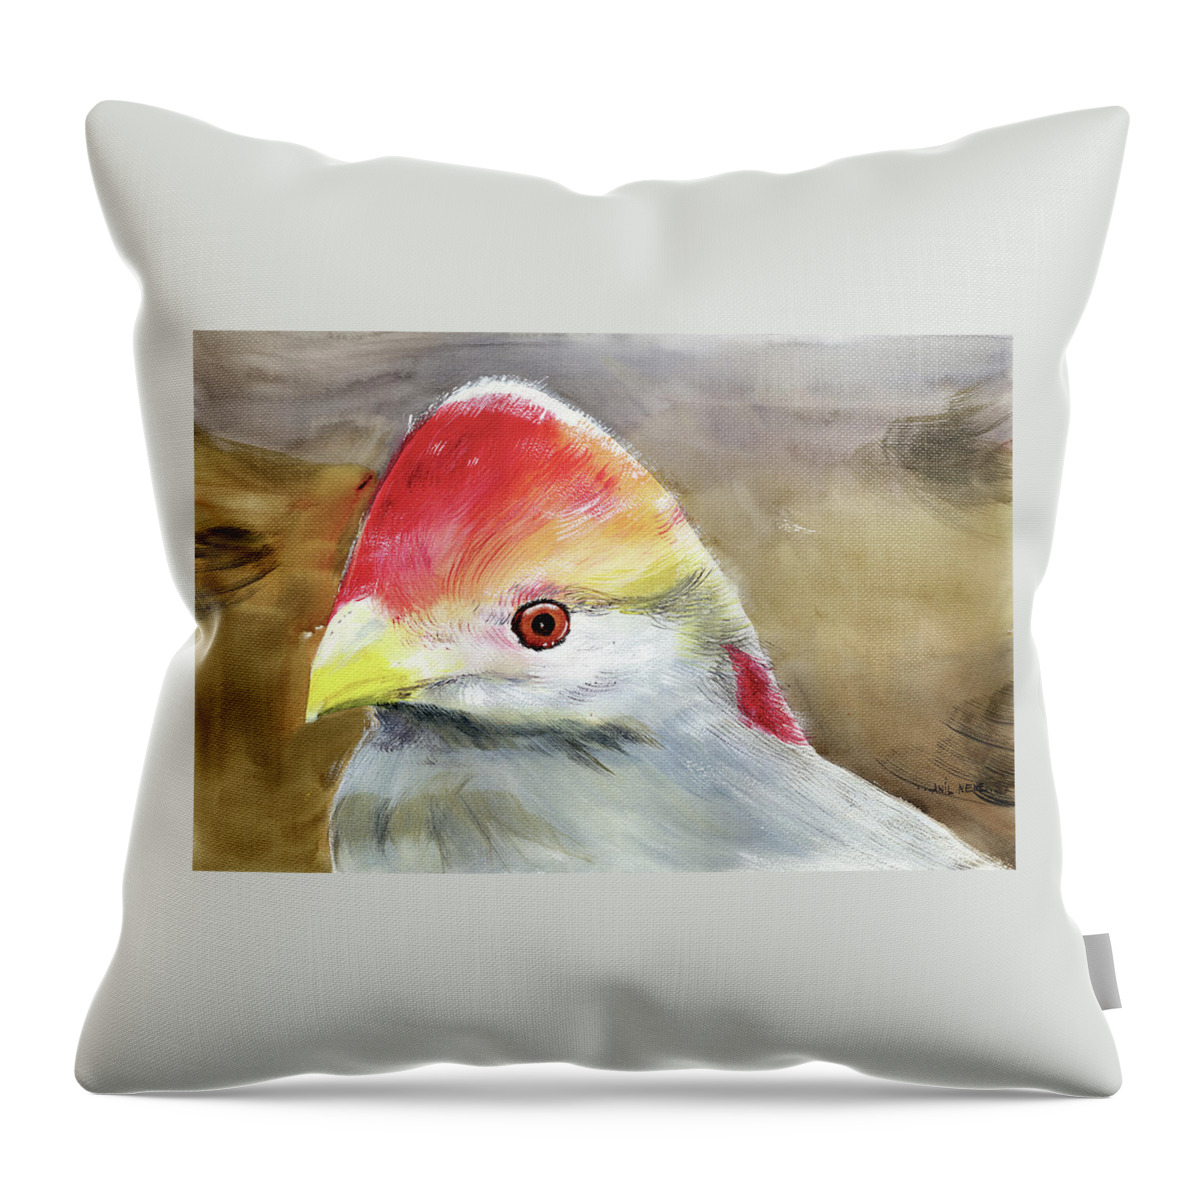 Nature Throw Pillow featuring the painting Red Crested Turaco by Anil Nene